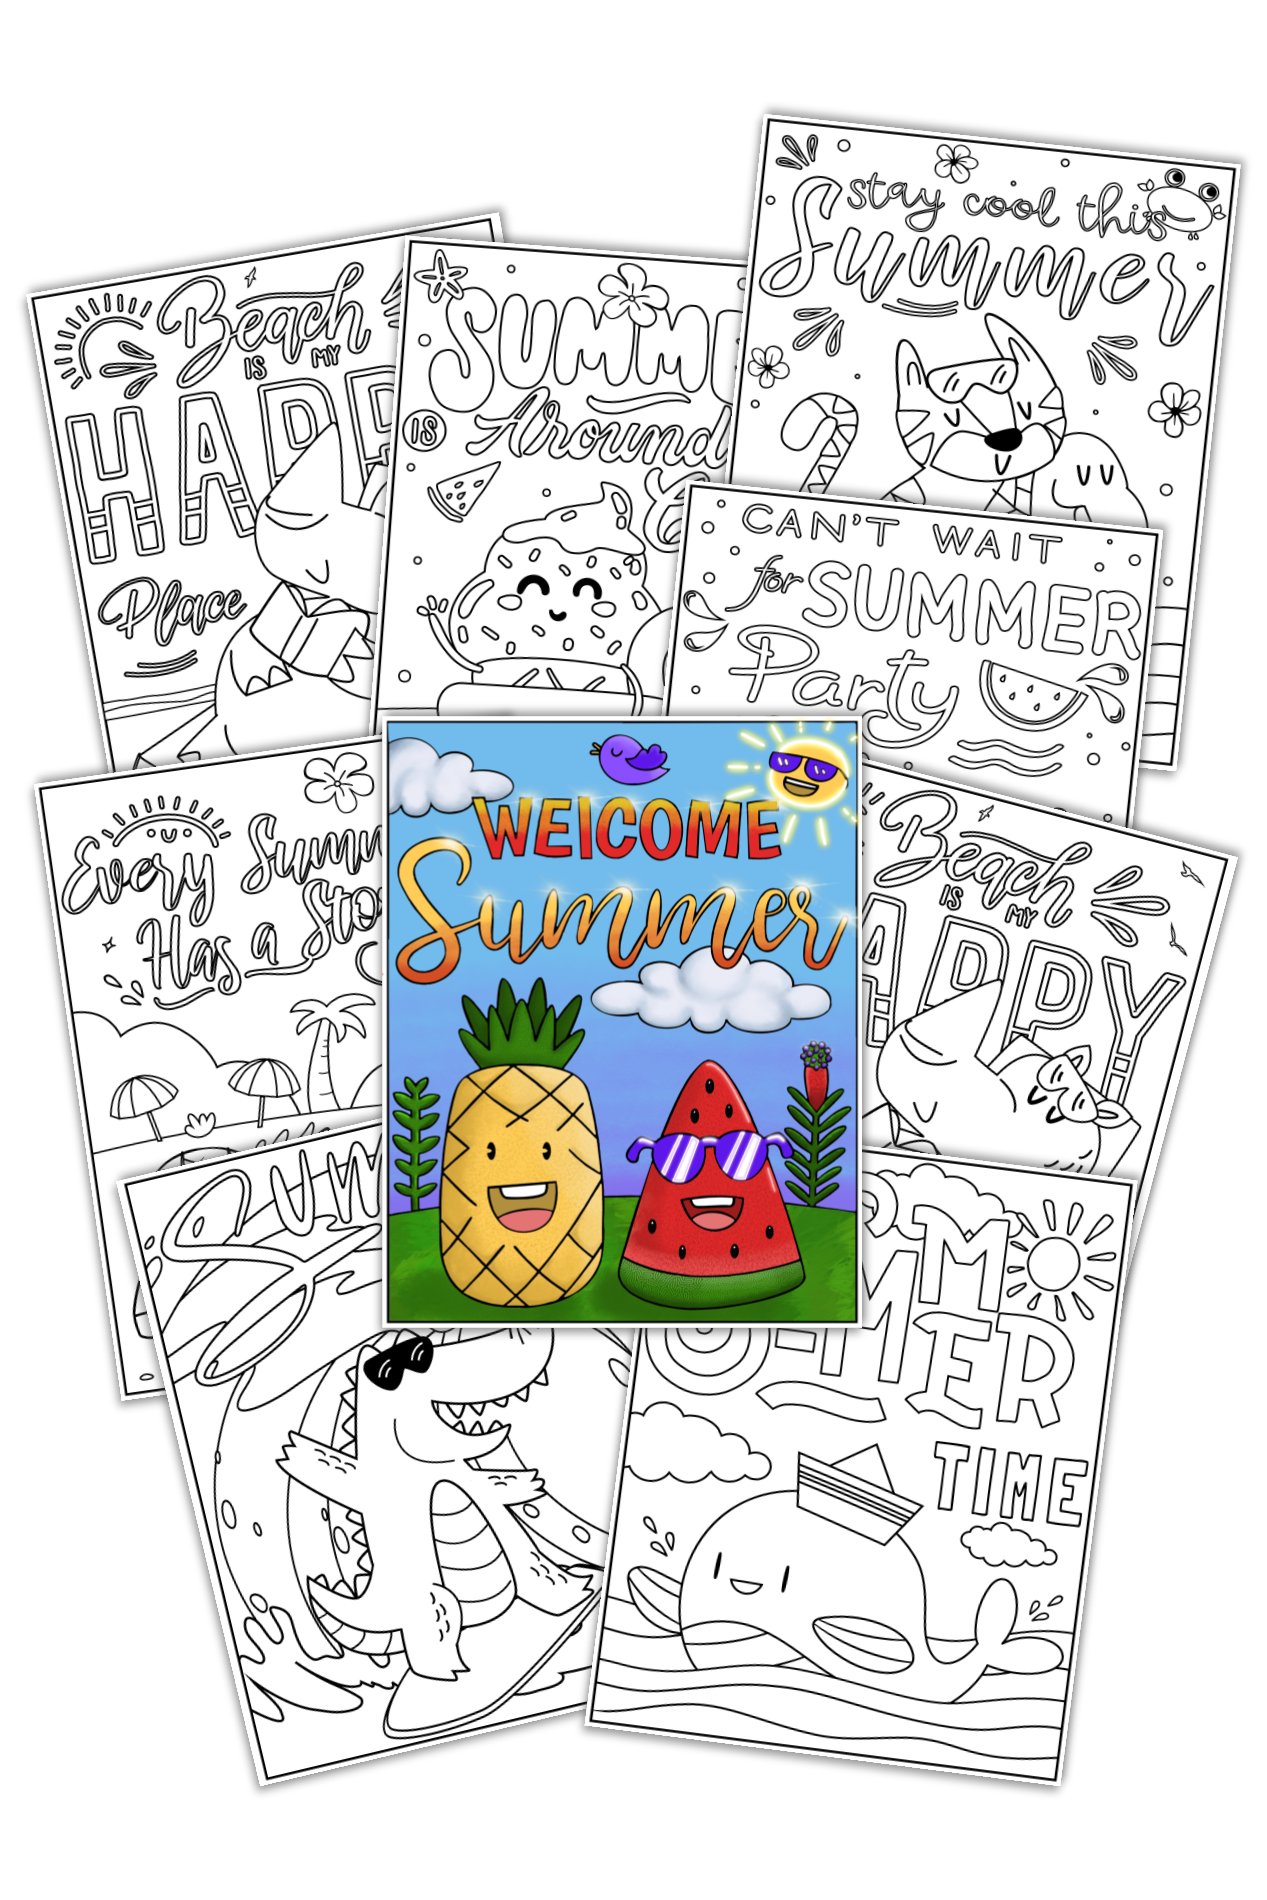 Summer fun coloring book pages â roaming willow designs